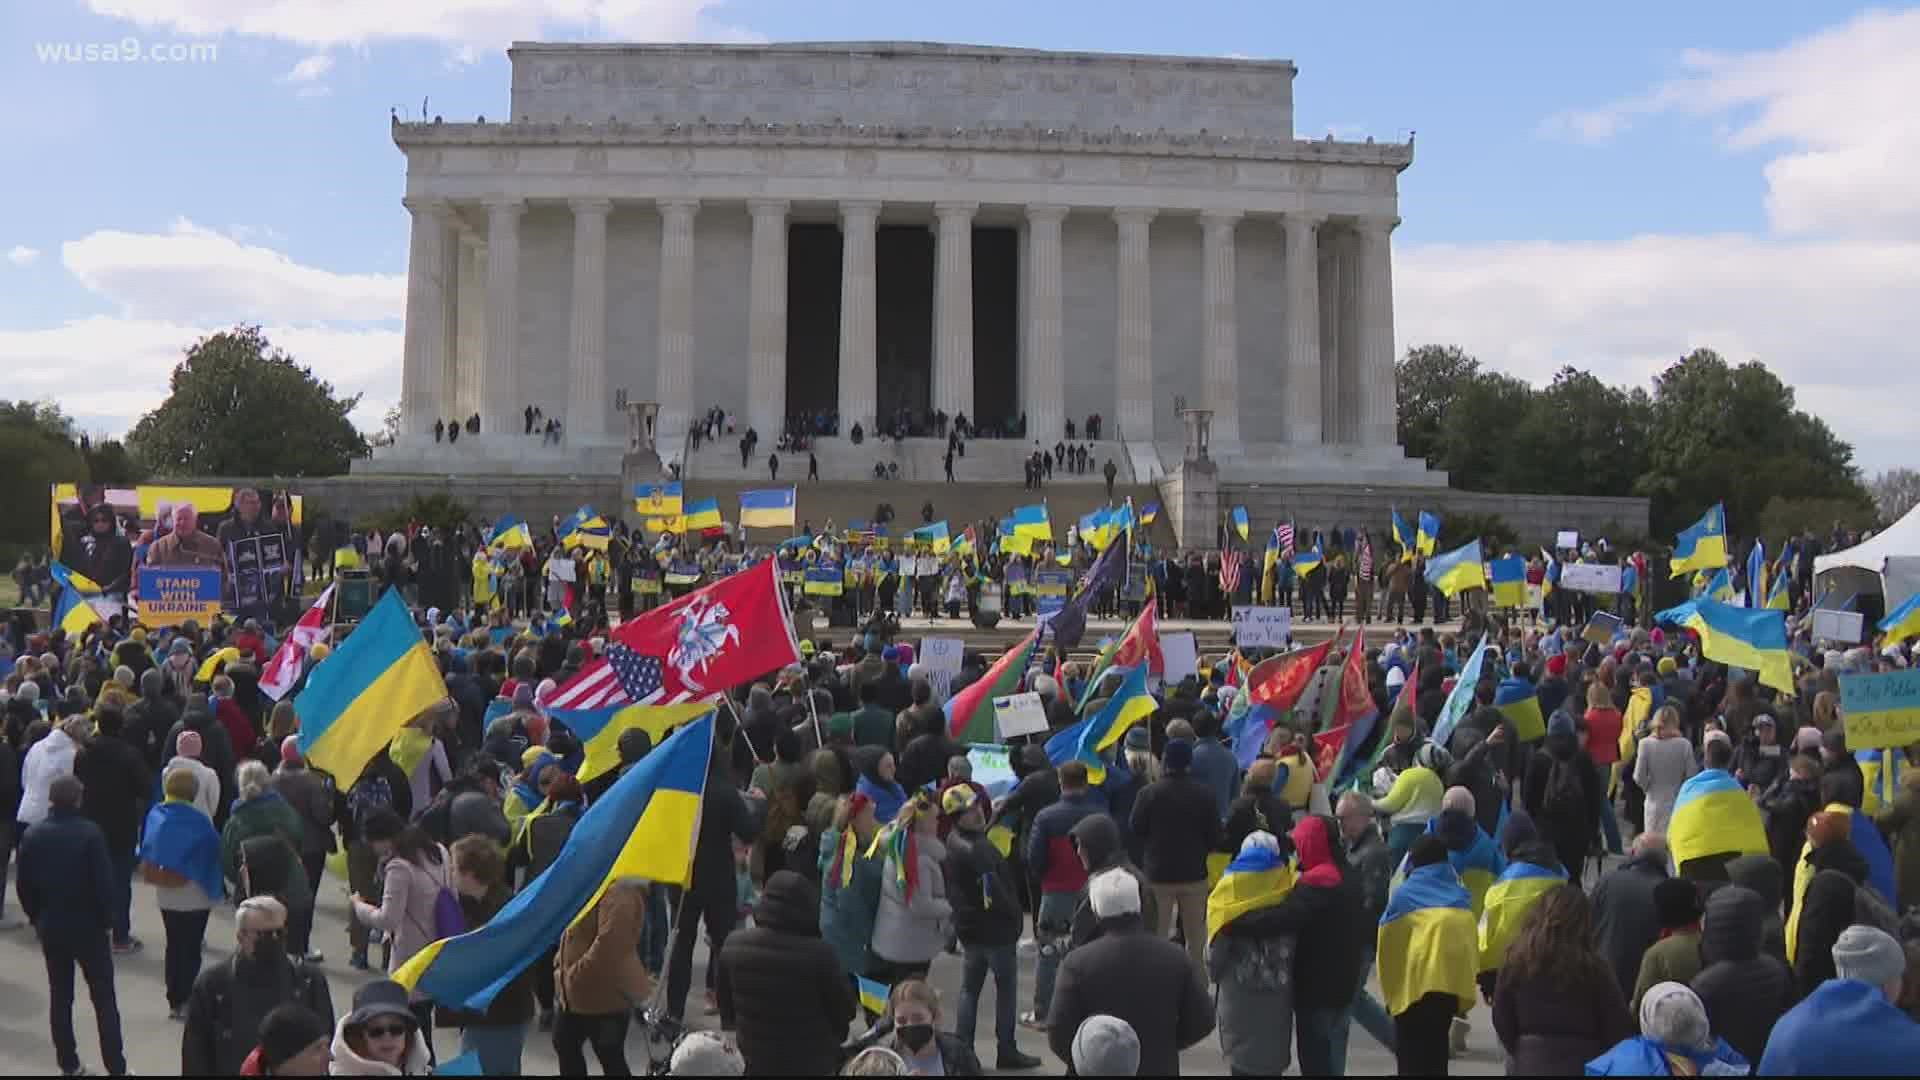 Much of the rally focused on a call for more American aid as Ukraine continues to face deadly bombings and attacks daily.